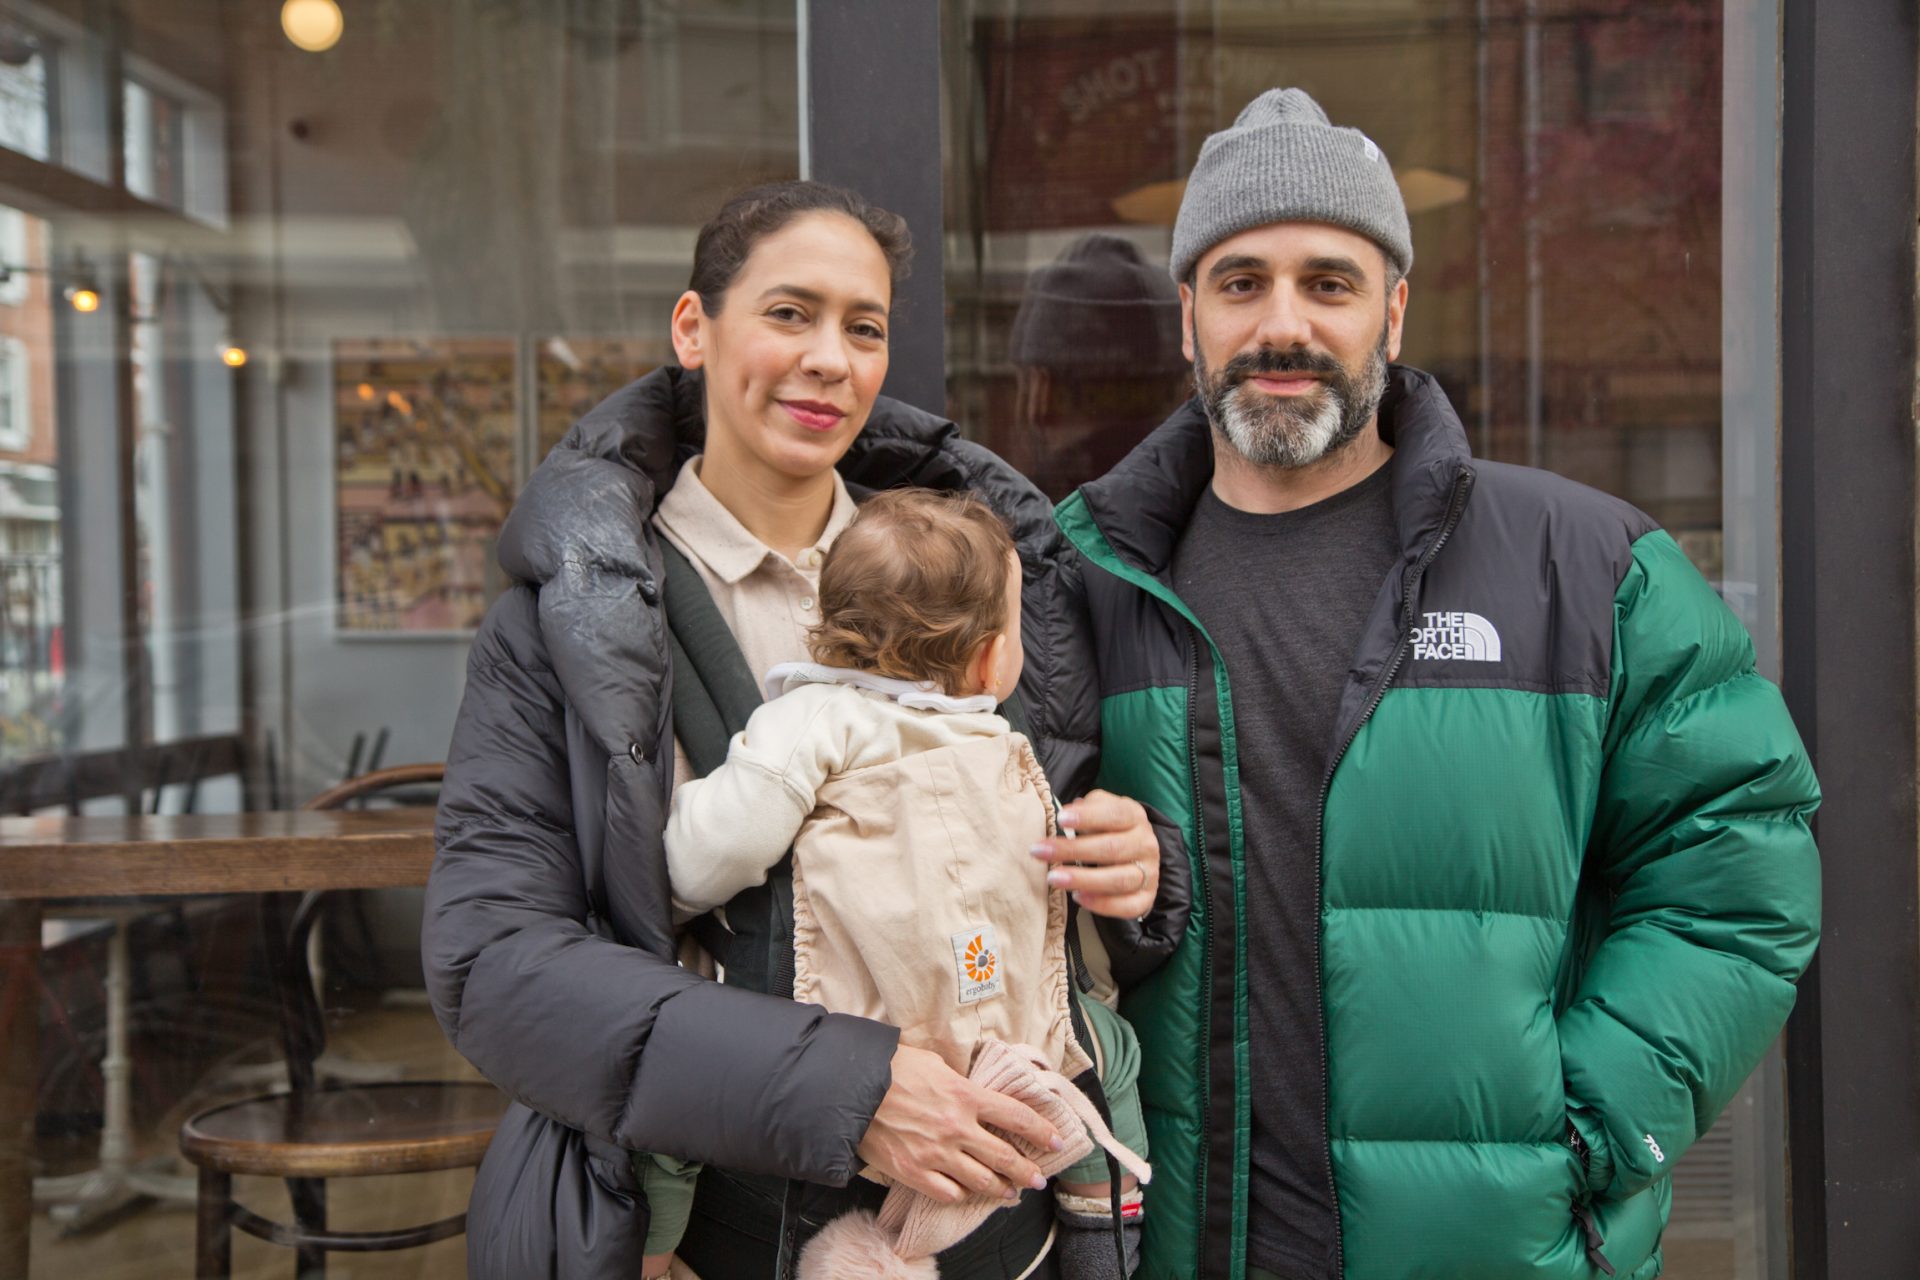 Mariel Freeman, the owner of Shot Tower coffee house, her husband Matthew Derago and her 9th month-old baby Gigi.